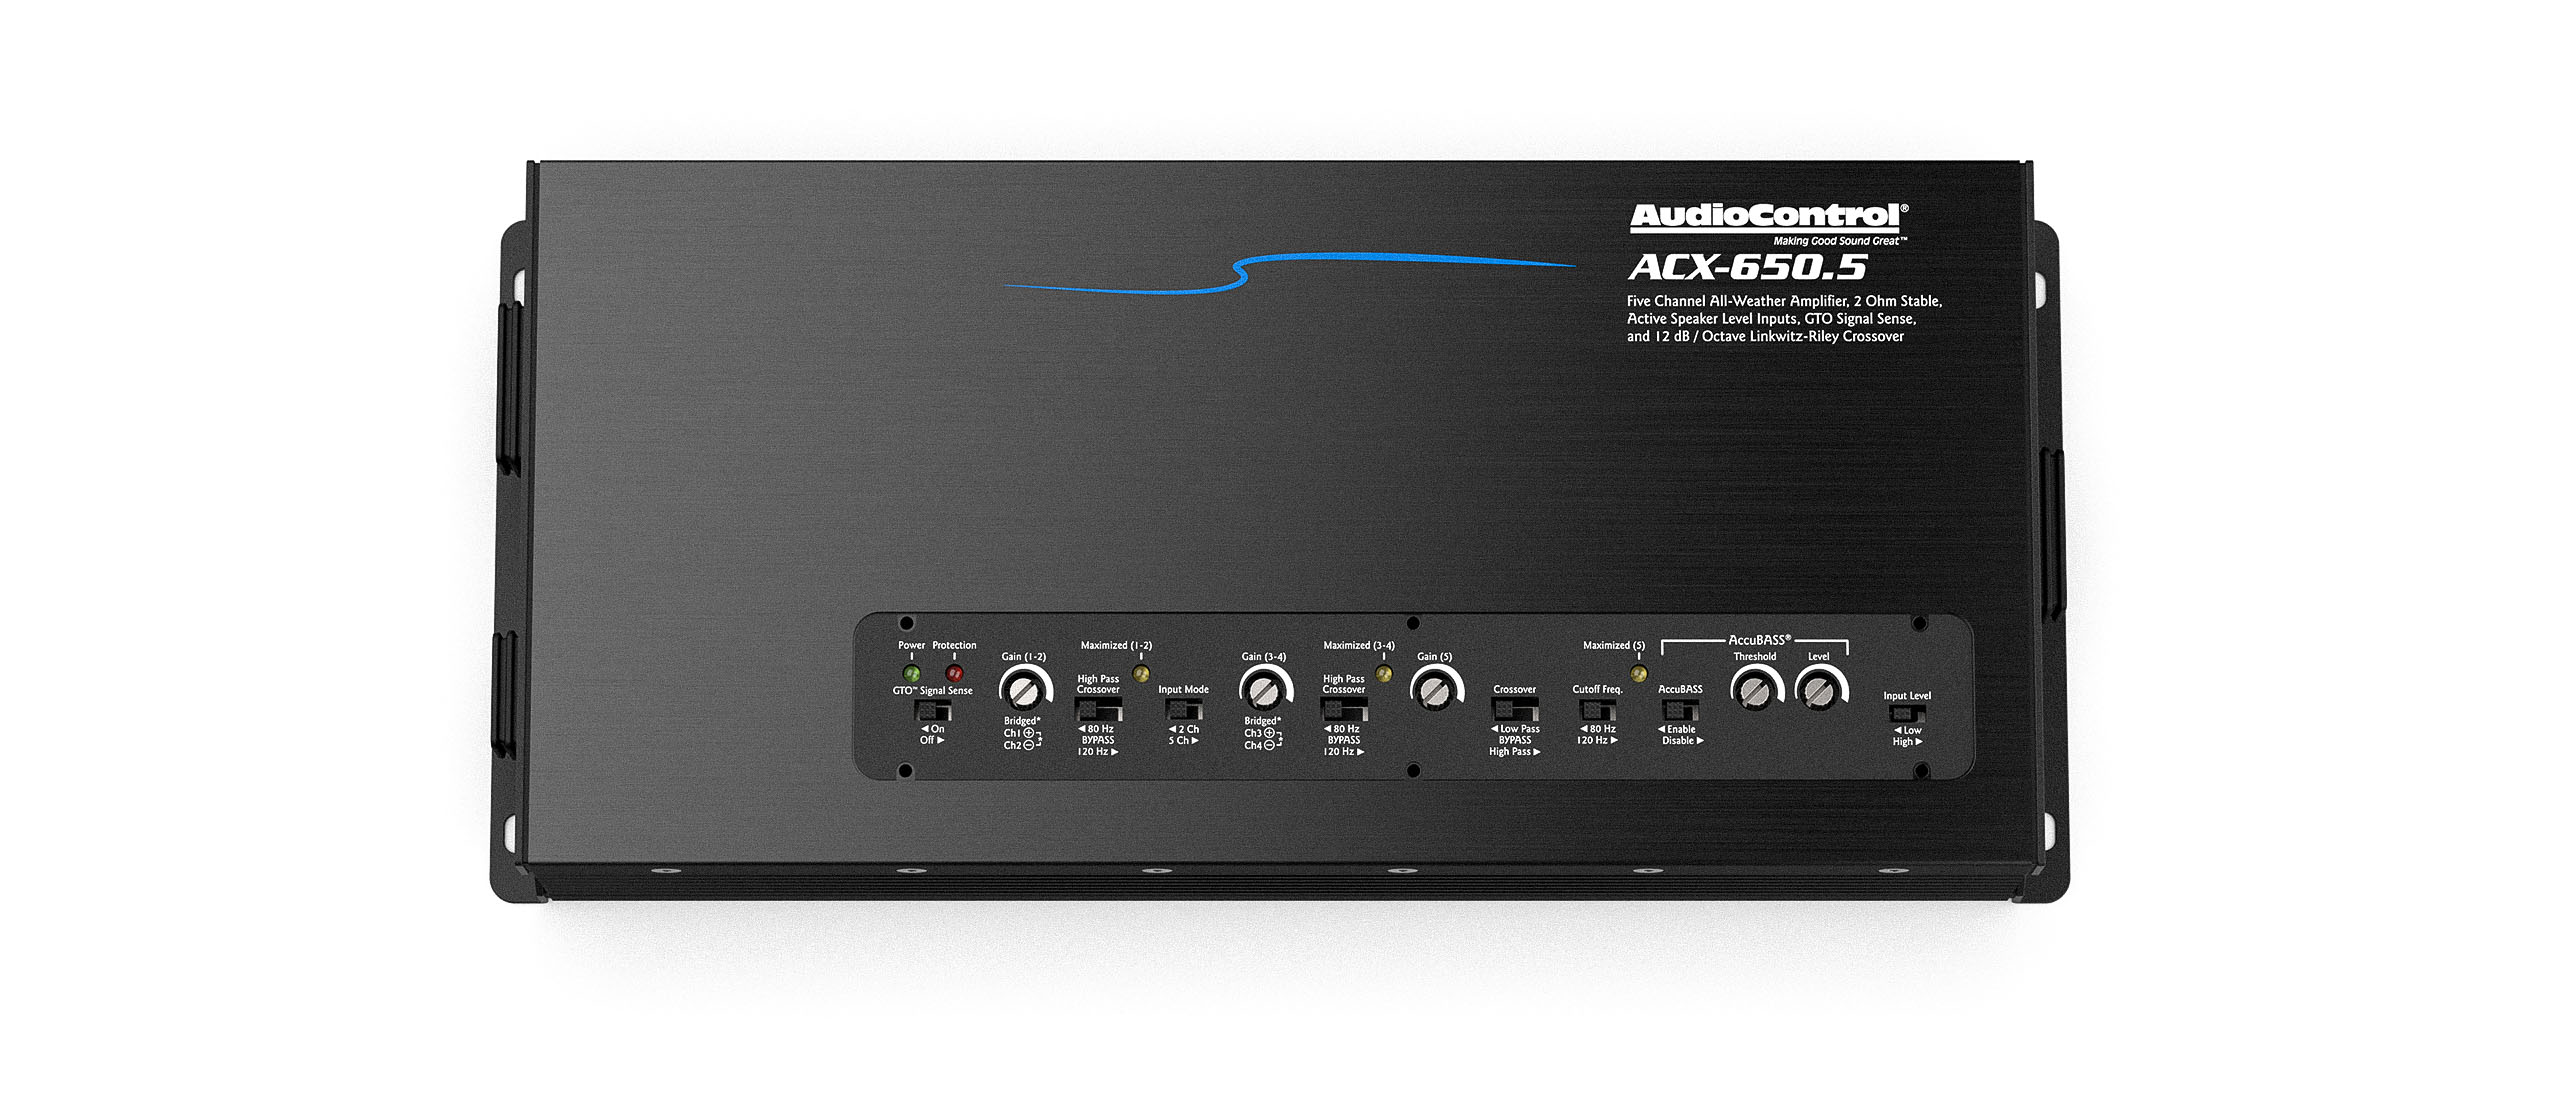 acx-650.5-cover-off